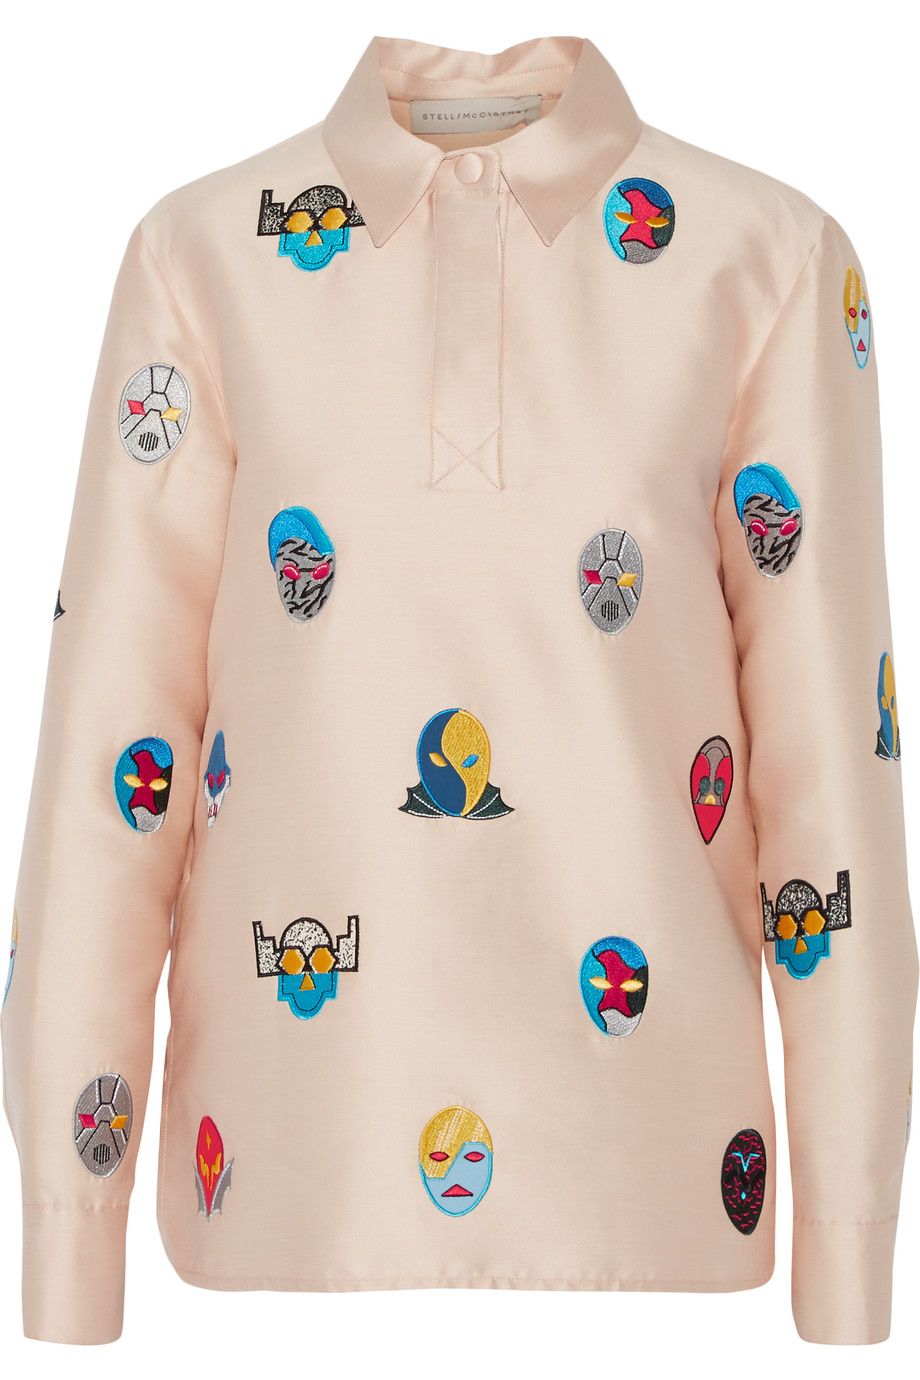 Stella McCartney sold outSuperstellaheroes Ramona embroidered satin Twill top